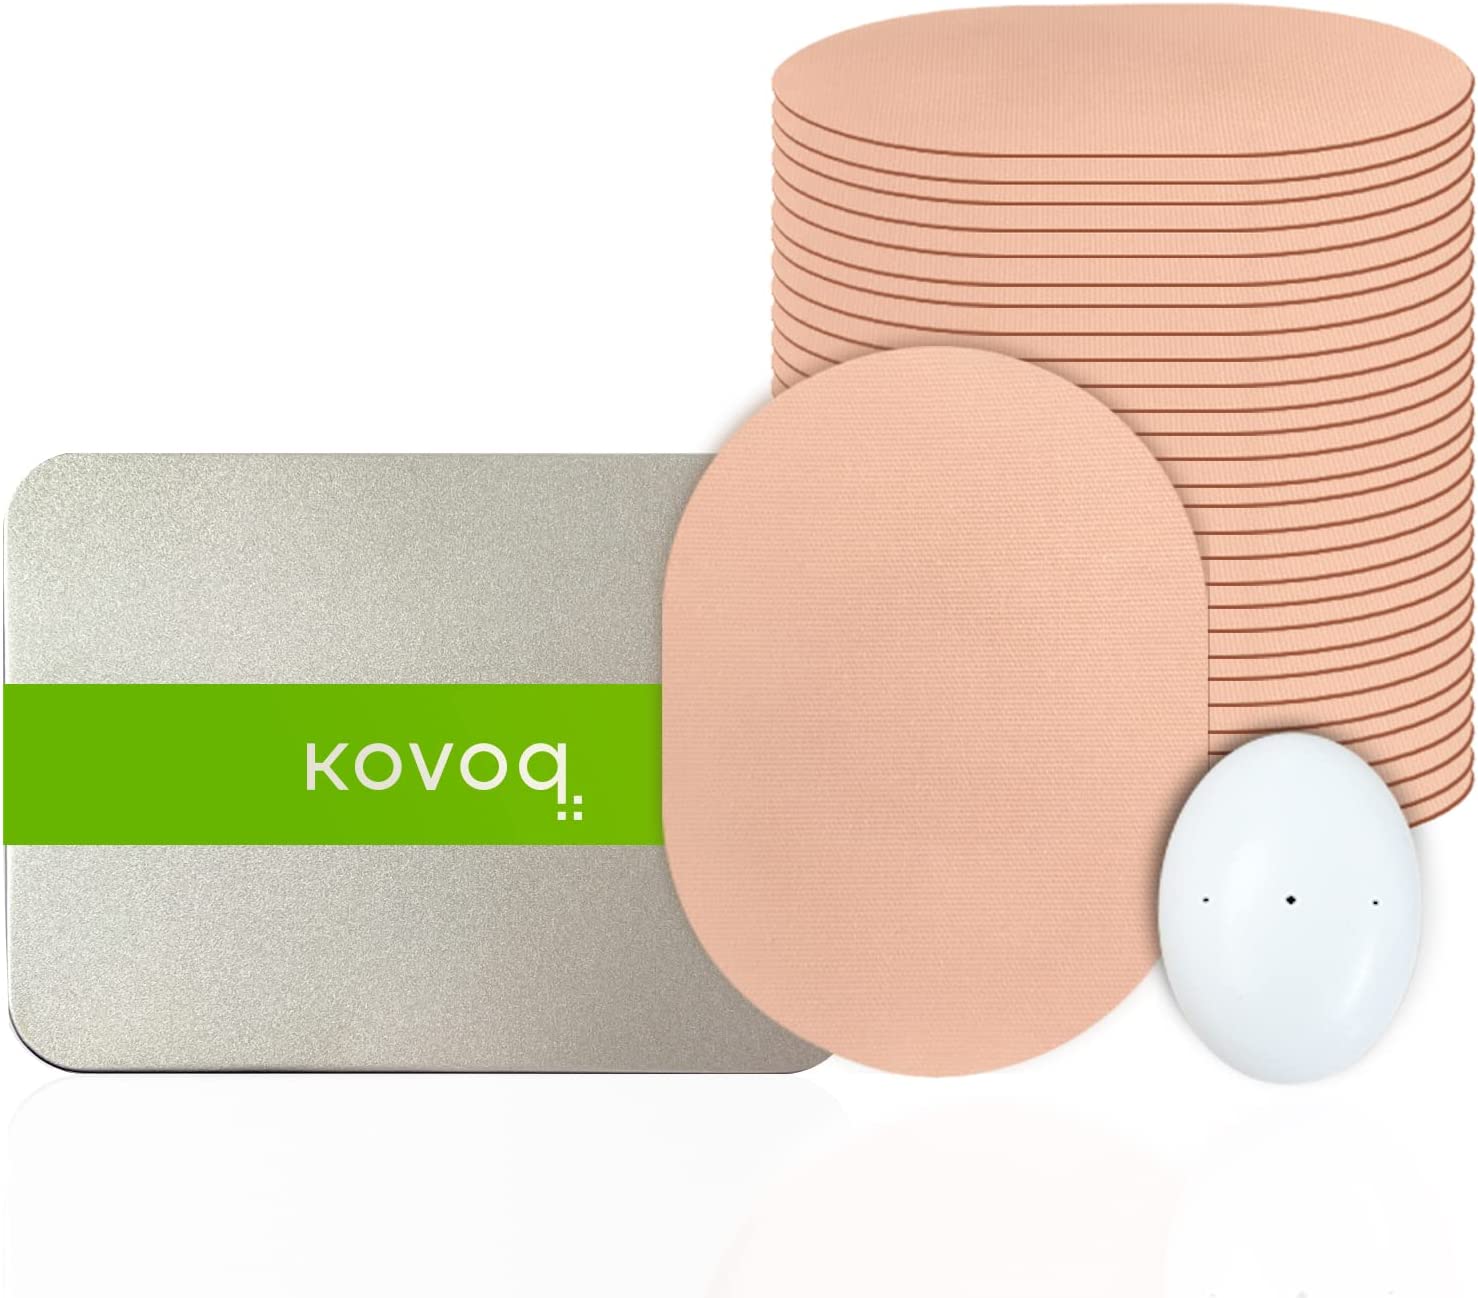 Kovoq Dexcom G6 Adhesive Patches, 25 Waterproof Adhesive Patches + 1  Reusable Hardshell Cover, No Glue on Sensor, Sweatproof, Breathable(Tan)